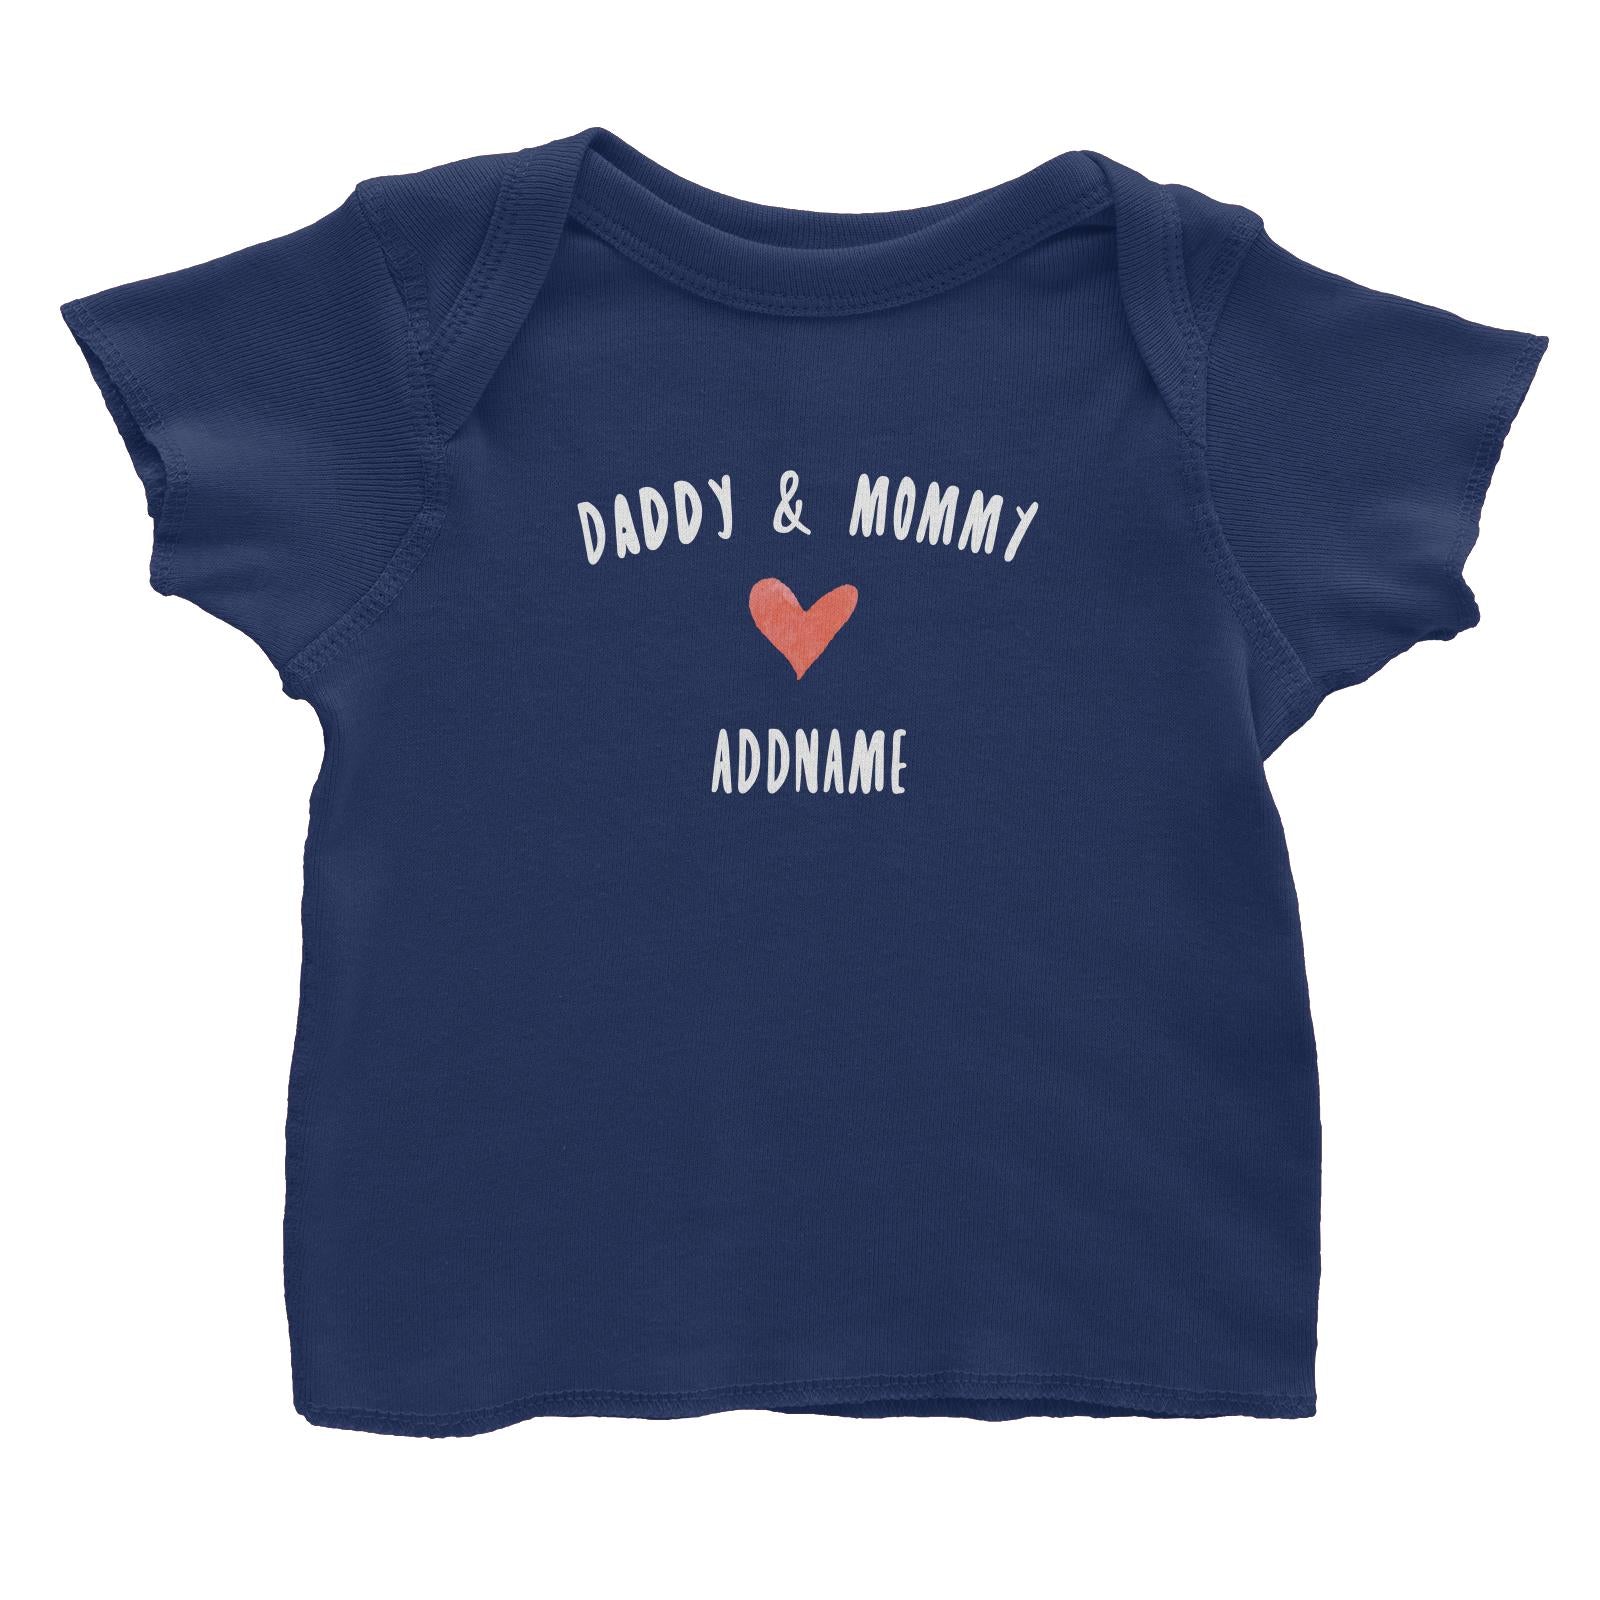 Daddy & Mommy Love Addname Baby T-Shirt  Matching Family Personalizable Designs